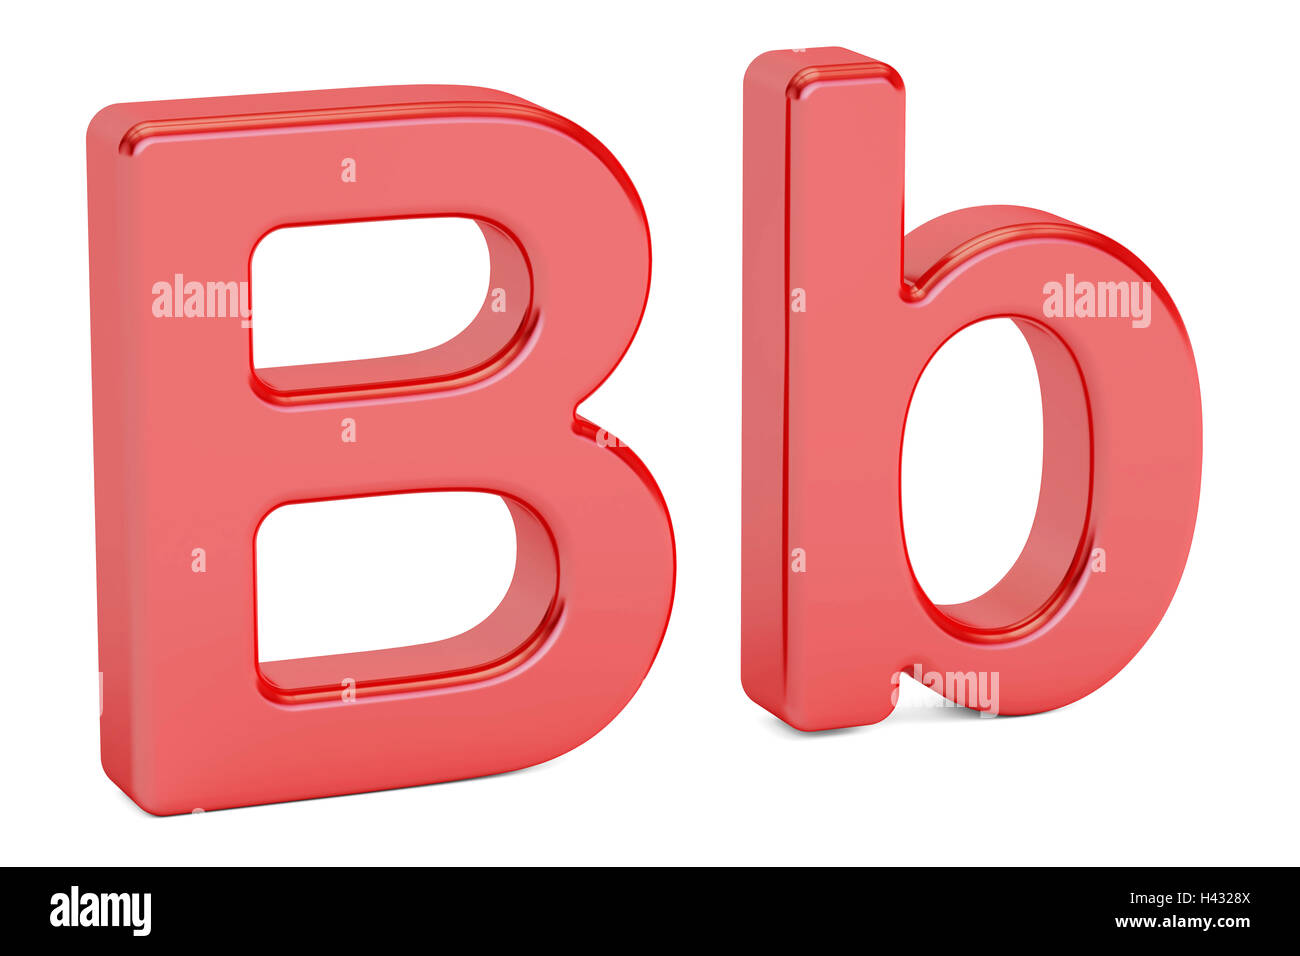 English letter B alphabet, 3D rendering isolated on white background Stock Photo